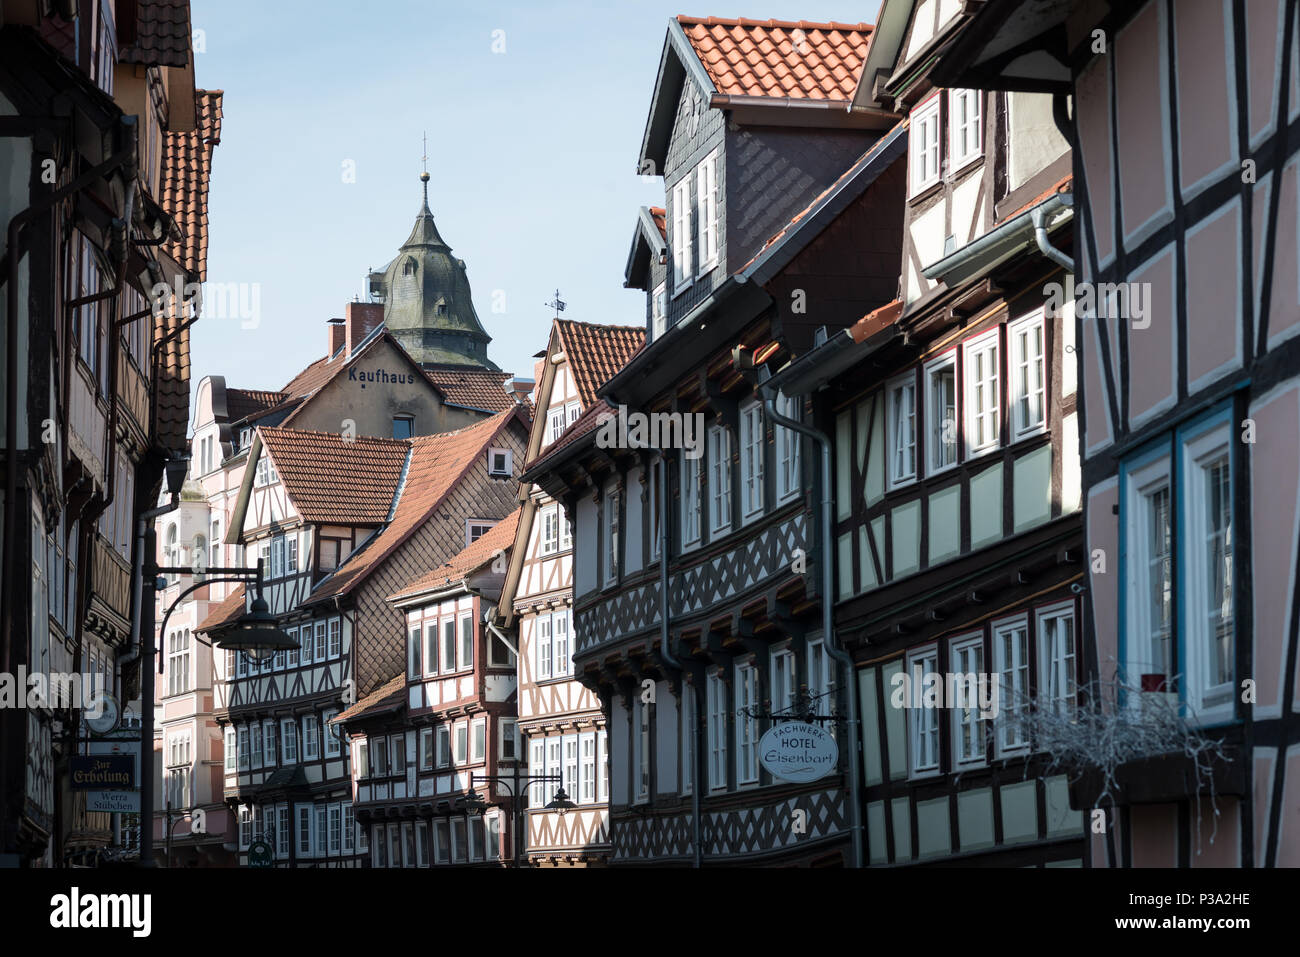 Hann. Muenden, Germany, half-timbered houses in the old town Stock Photo